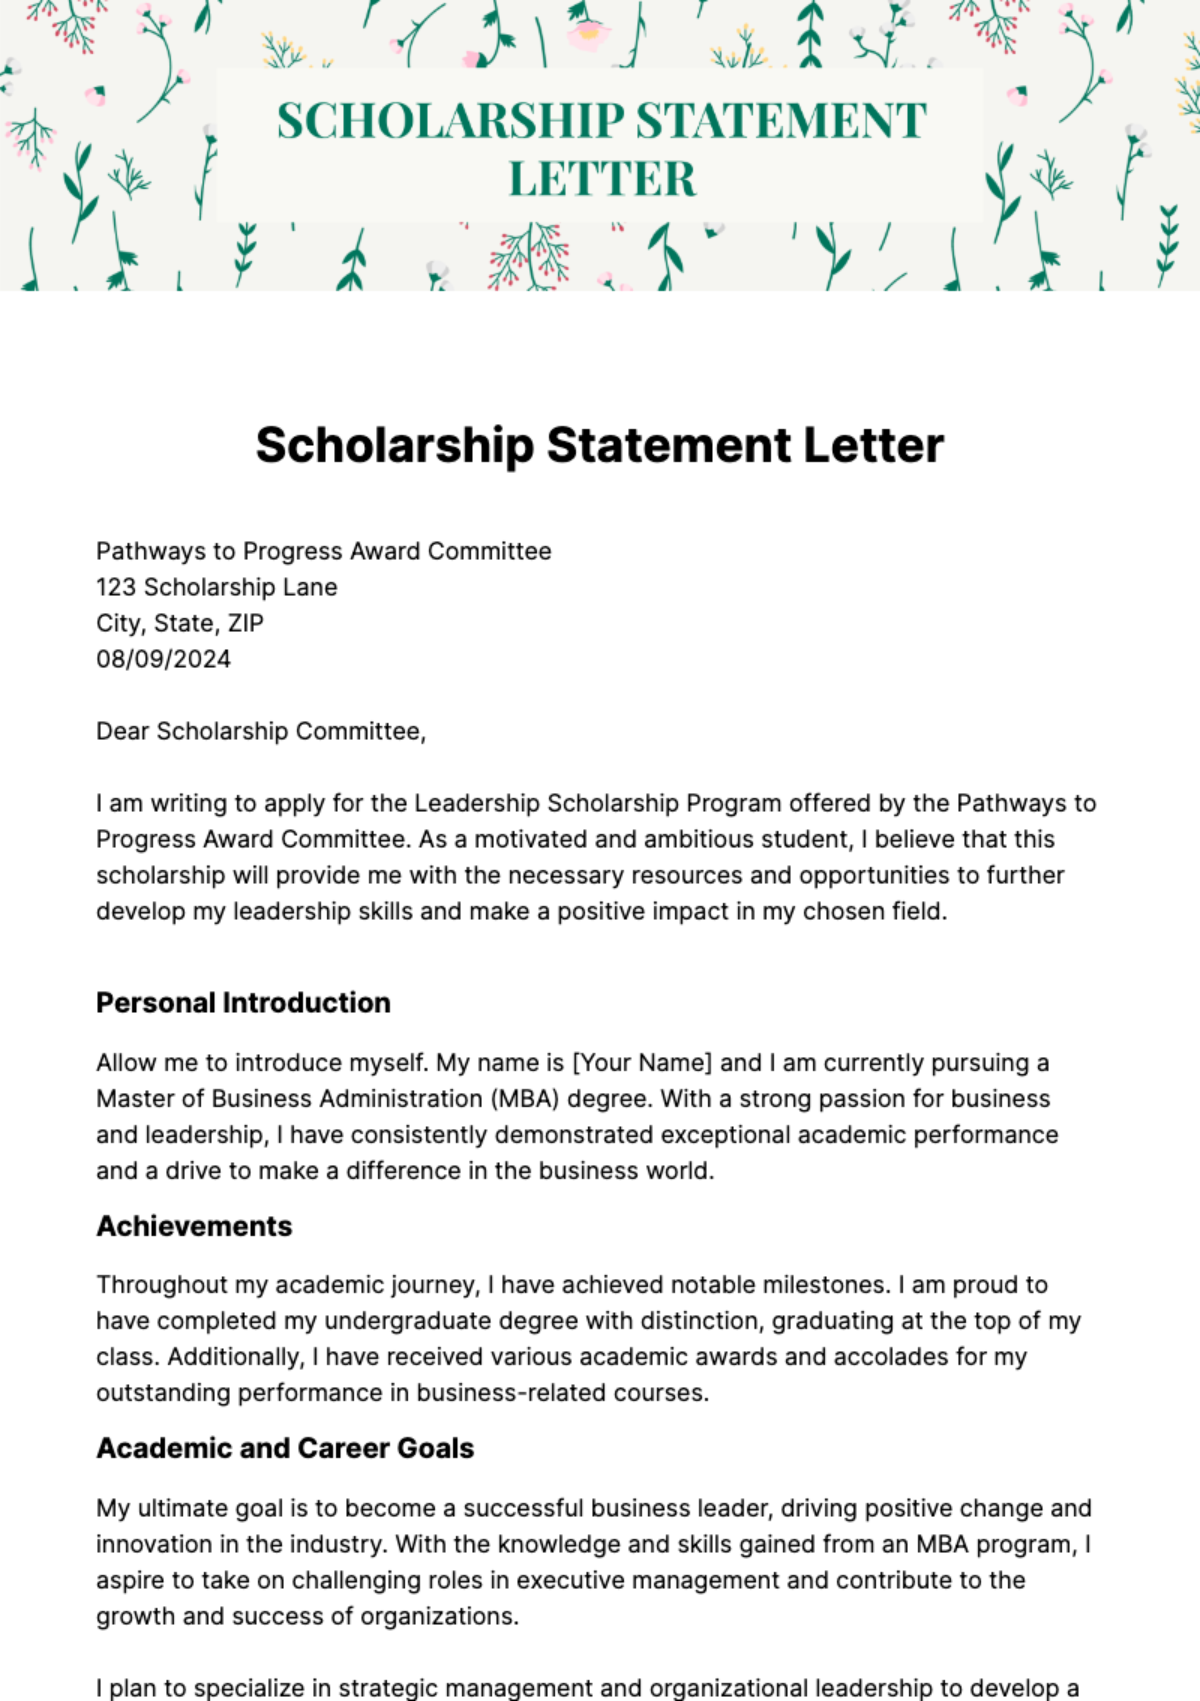 Scholarship Statement Letter Template